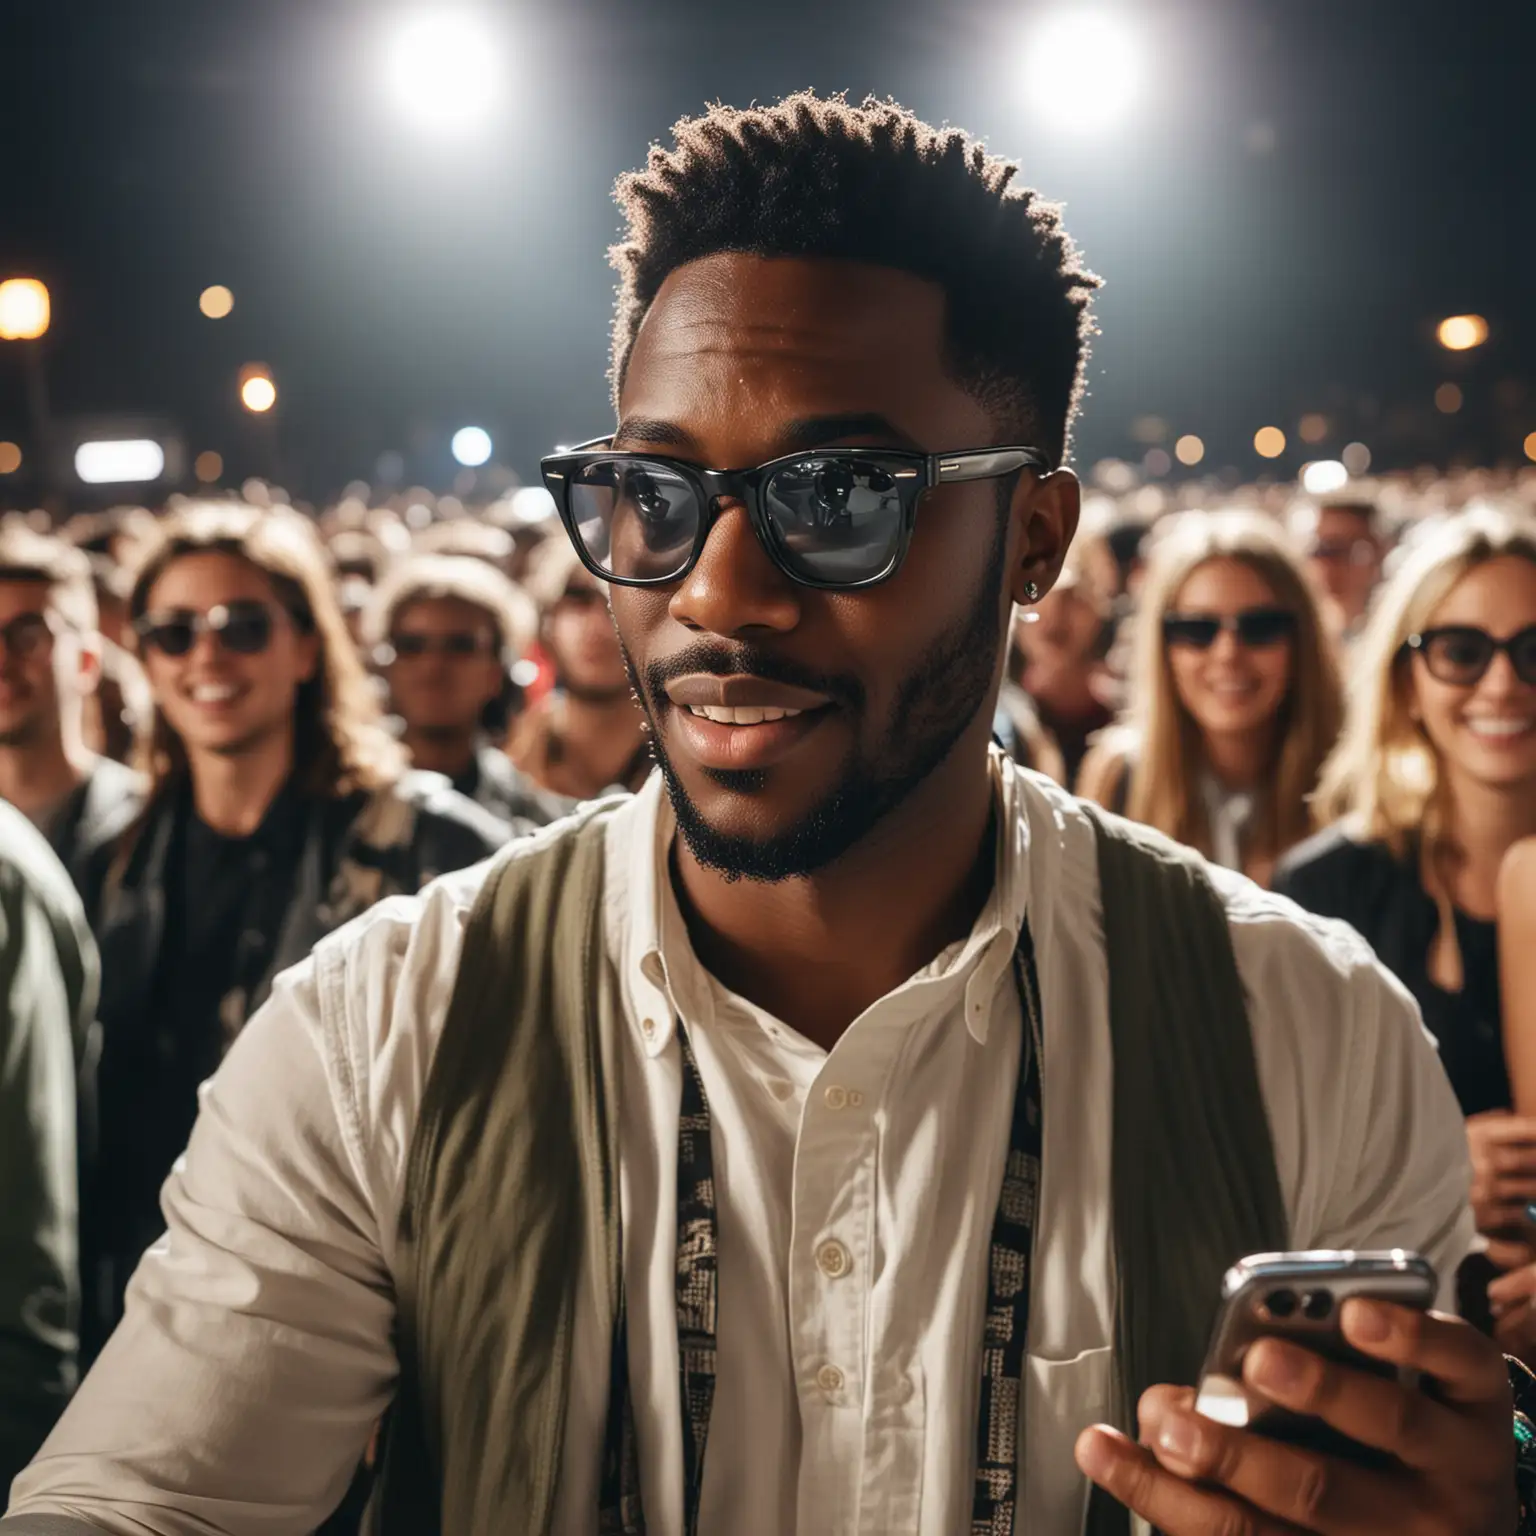 Young African American Man Enjoying Live Music Concert with Friends via FaceTime